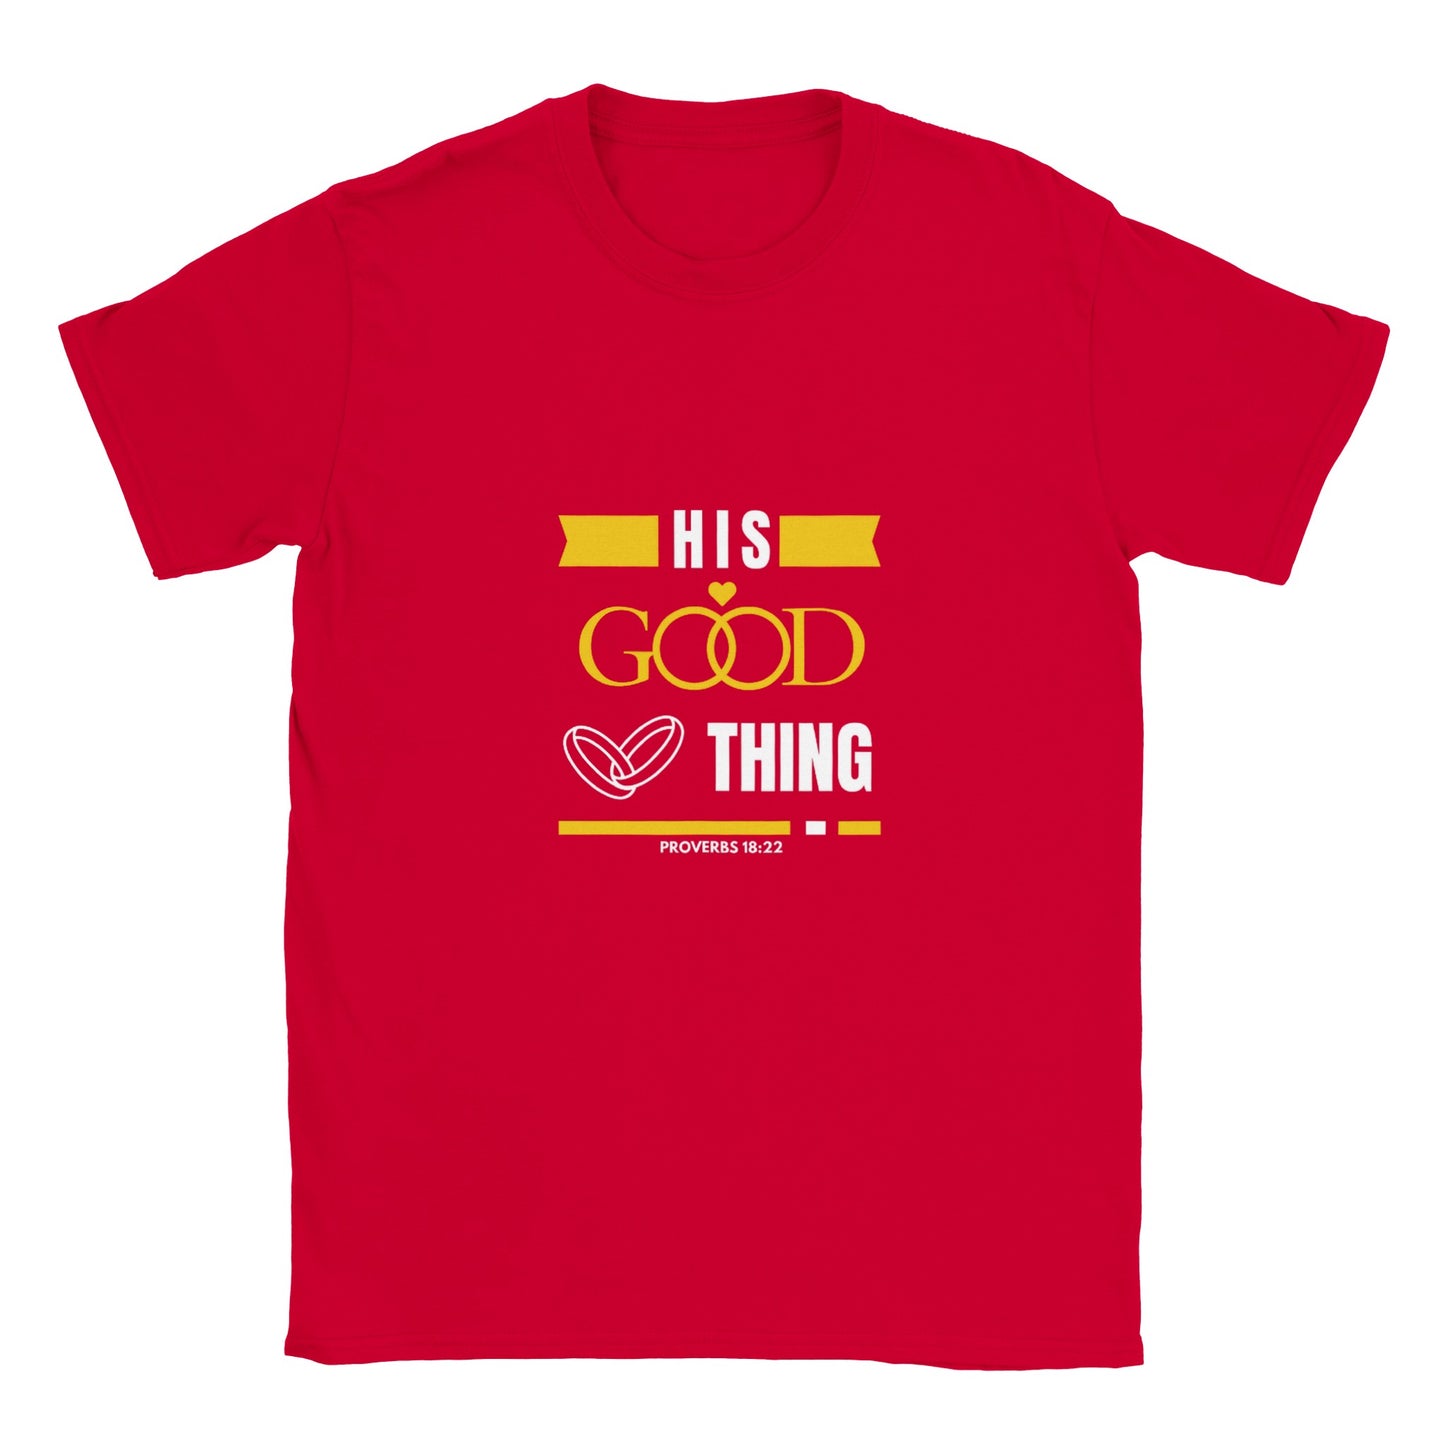 His Good Thing Couples T-shirt (Hers)